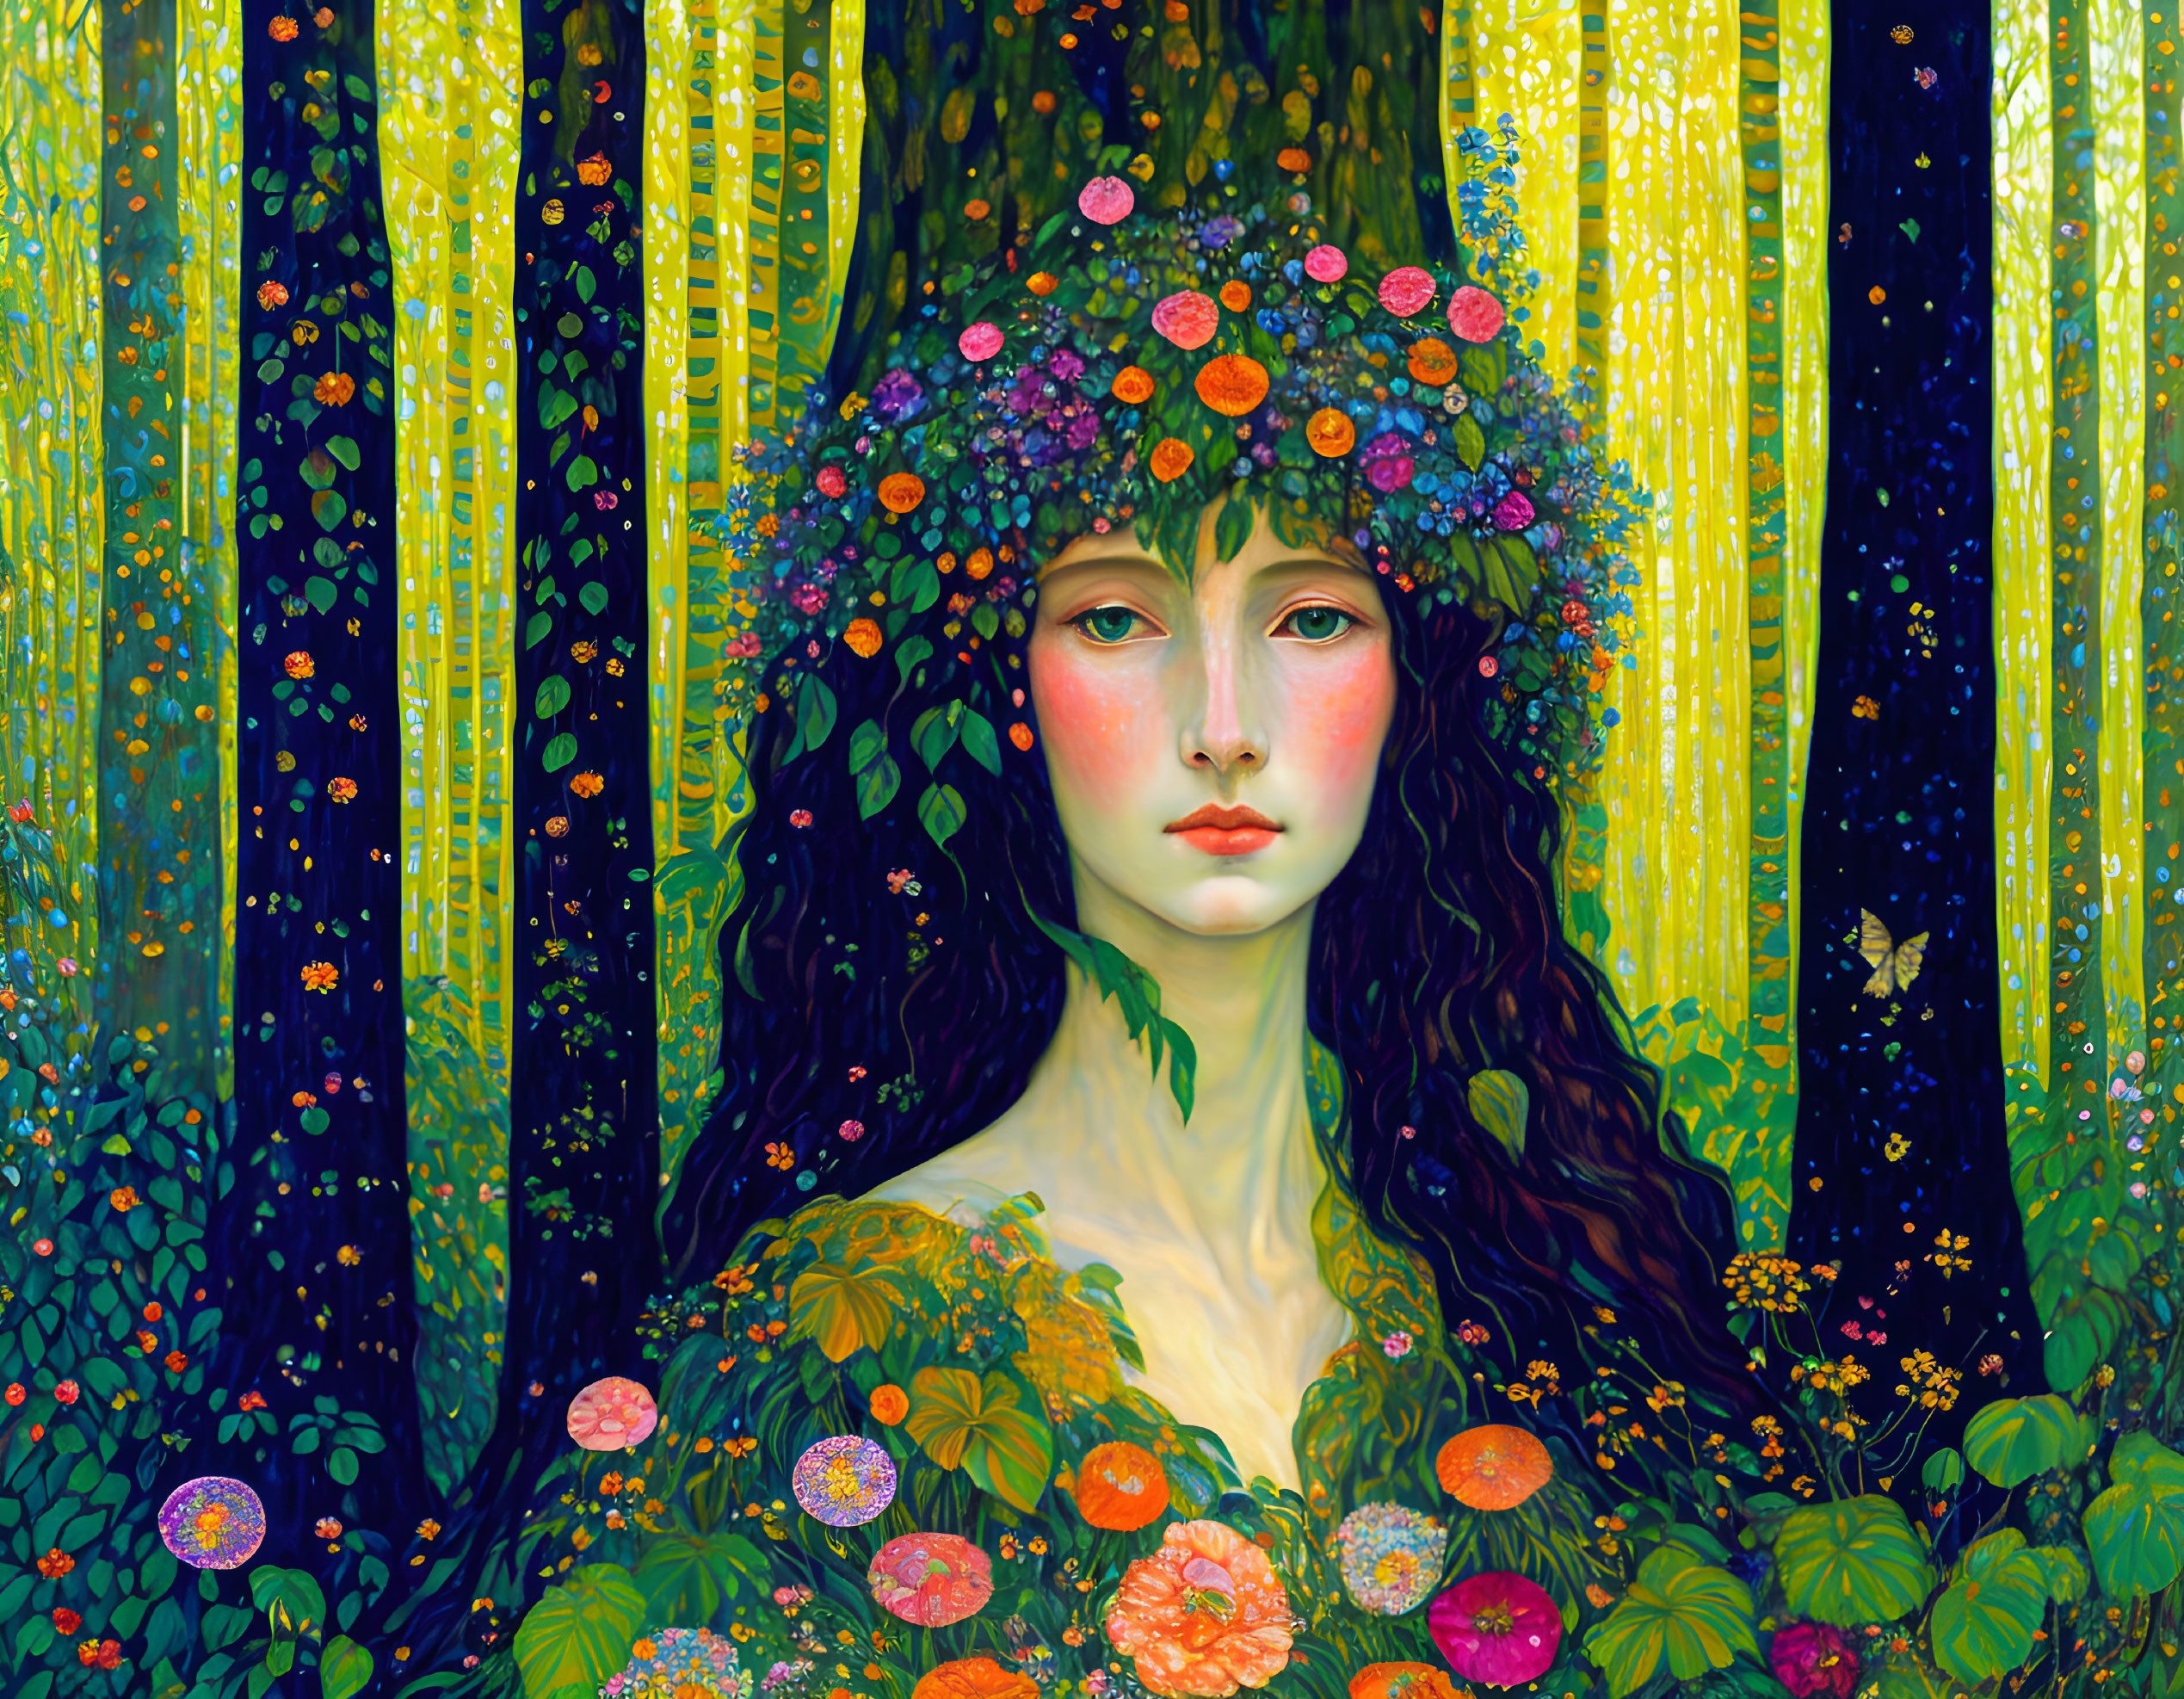 Colorful Illustration: Woman with Floral Crown in Enchanted Forest